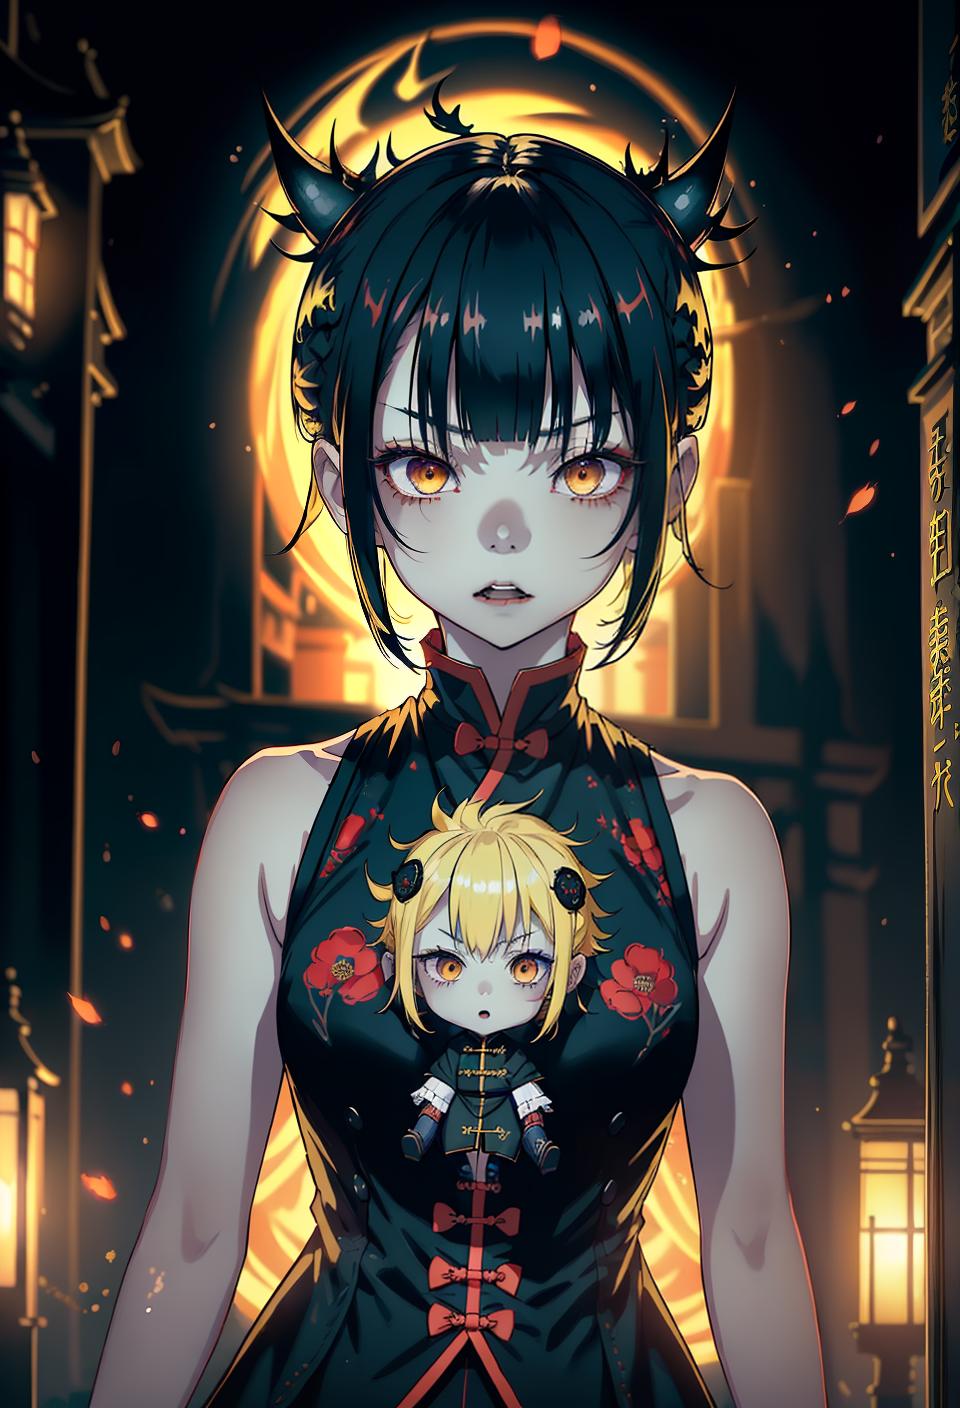  ((trending, highres, masterpiece, cinematic shot)), 1girl, chibi, female chinese outfit, graveyard scene, very short spiked yellow hair, bangs covering eyes,  dark eyes, rational personality, scared expression, very pale skin, magical, lucky